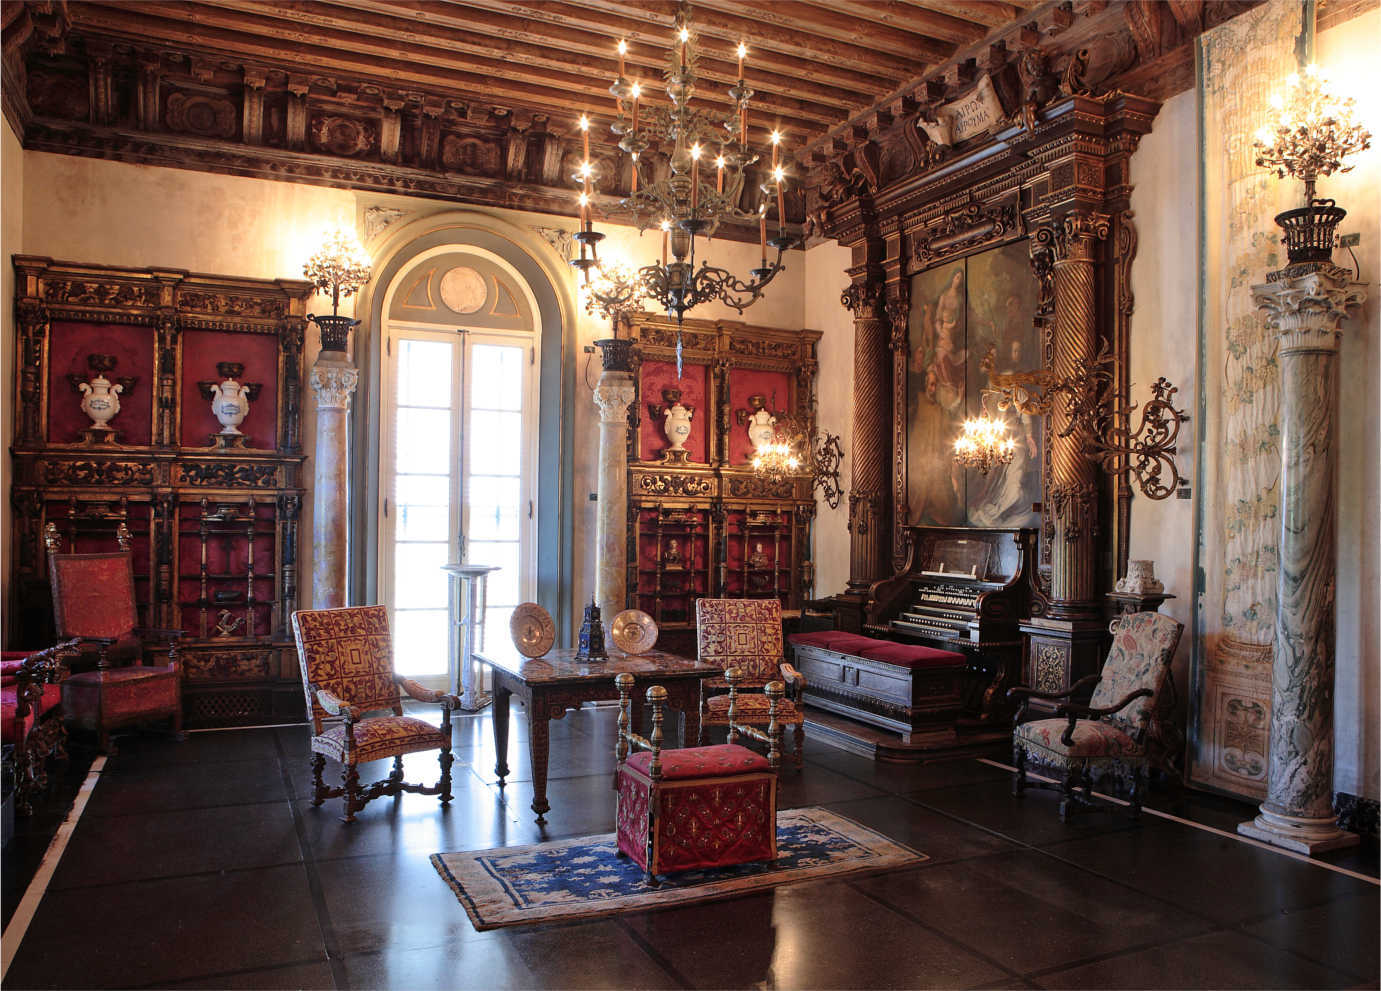 A seating area inside the mansion.  Image courtesy of Vizcaya.